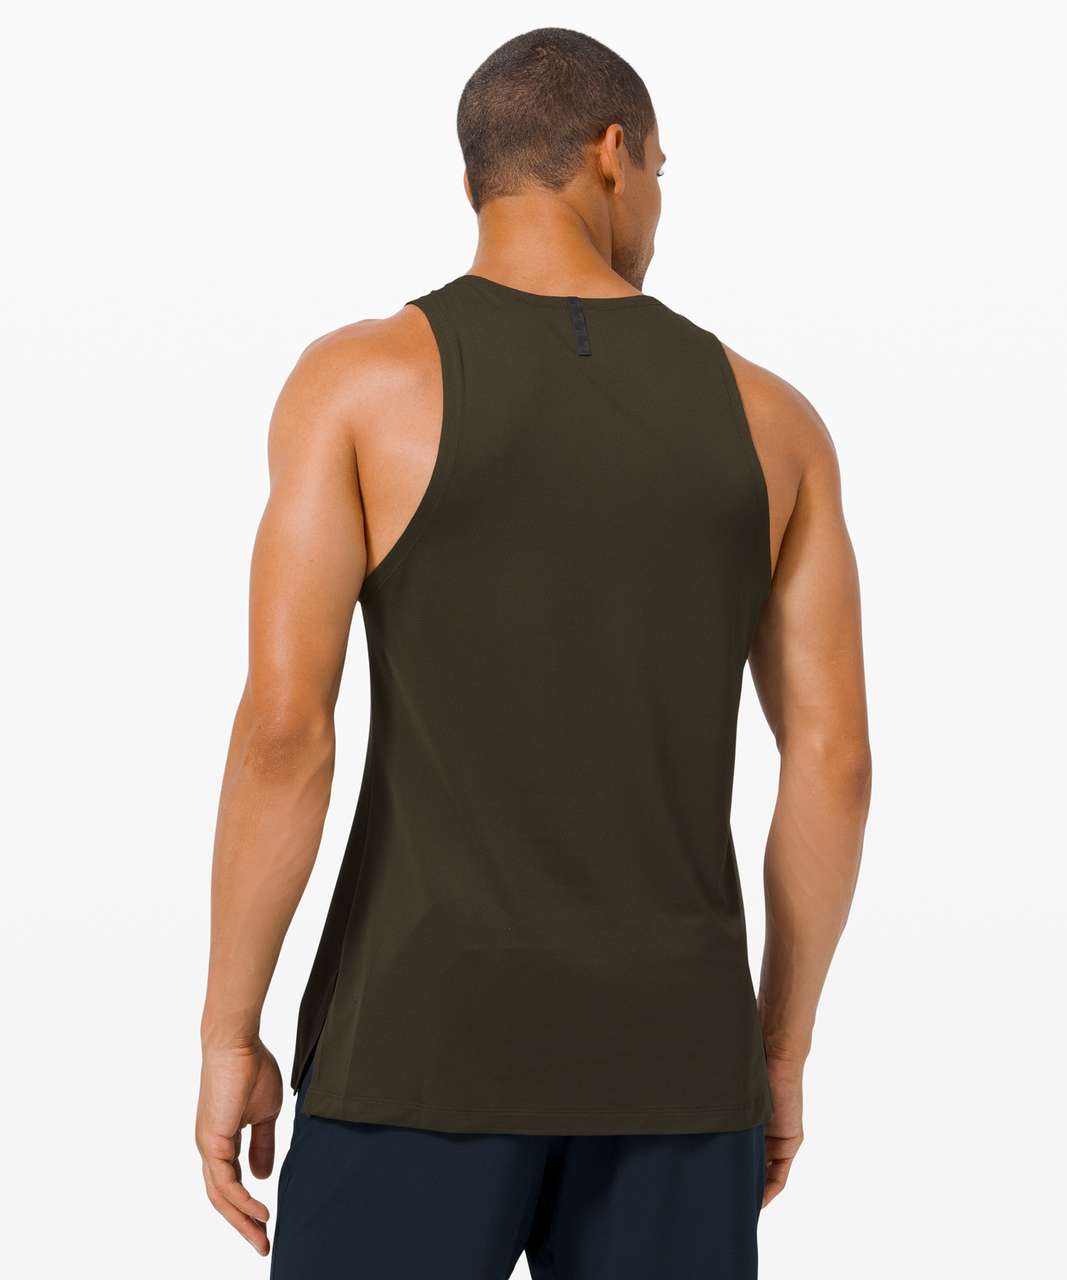 Green License to Train recycled-blend top, Lululemon